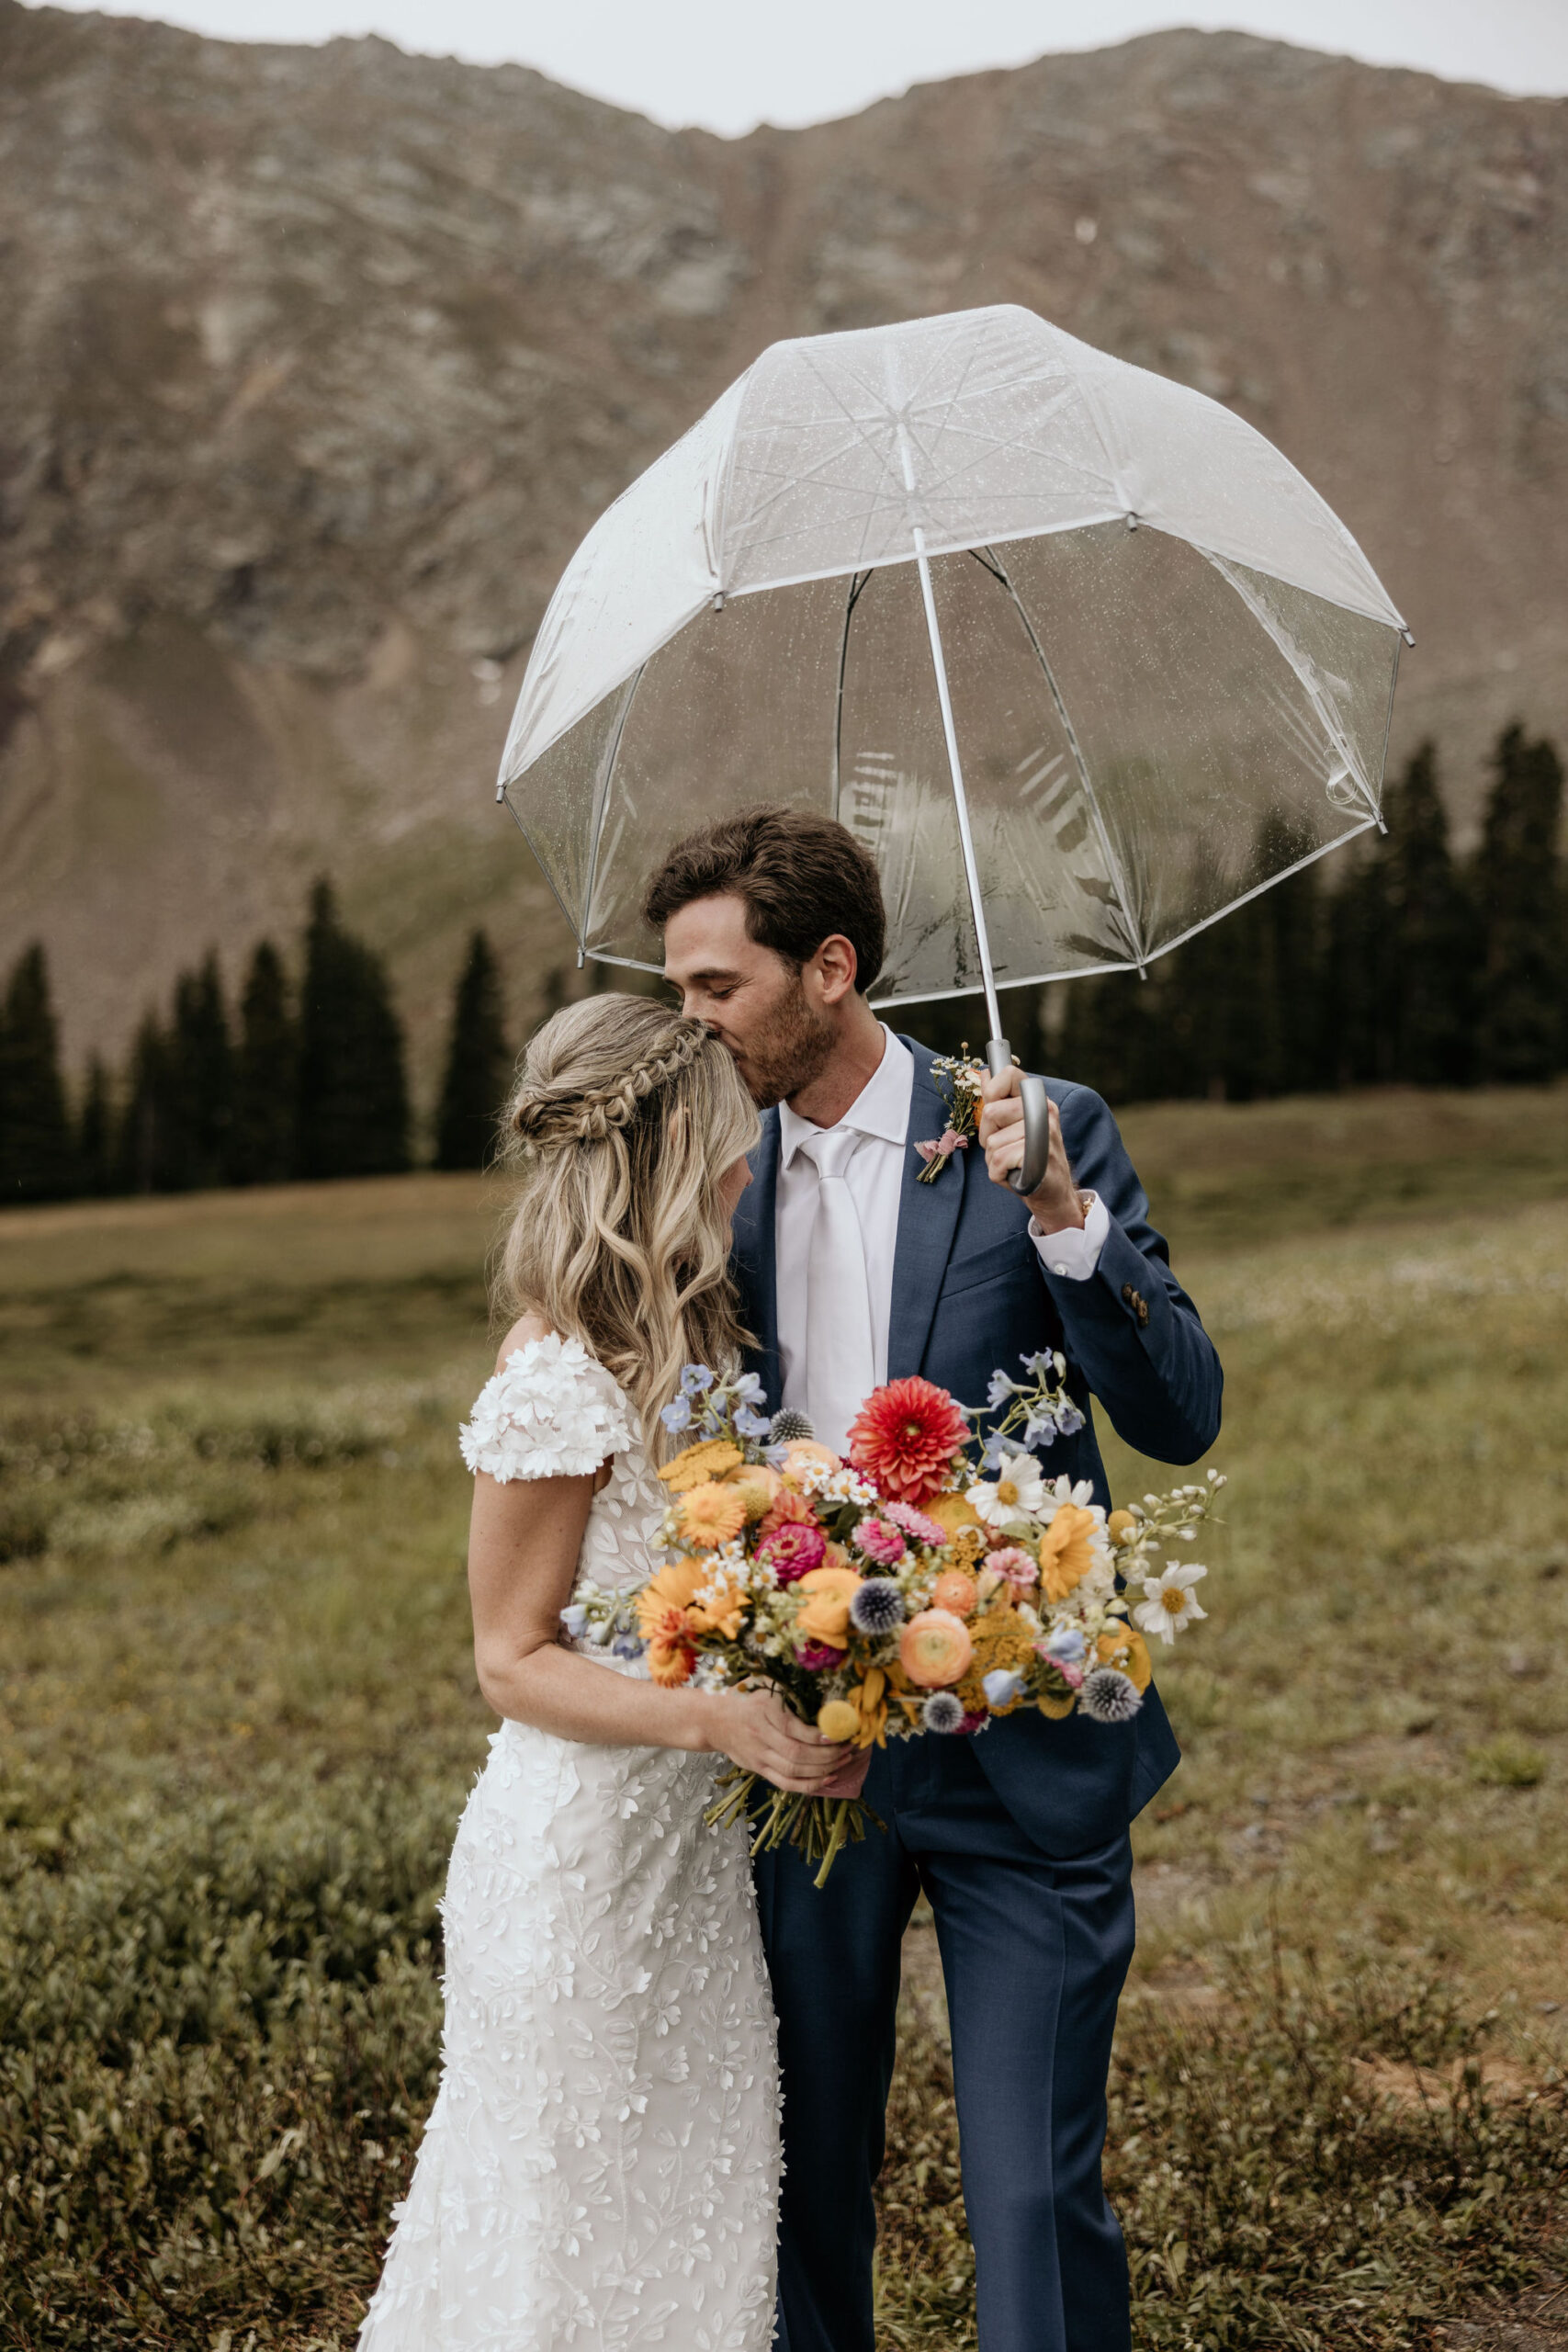 Why Renew Your Wedding Vows? Ideas, Reasons, + How-To: groom kisses bride and holds clear umbrella over them